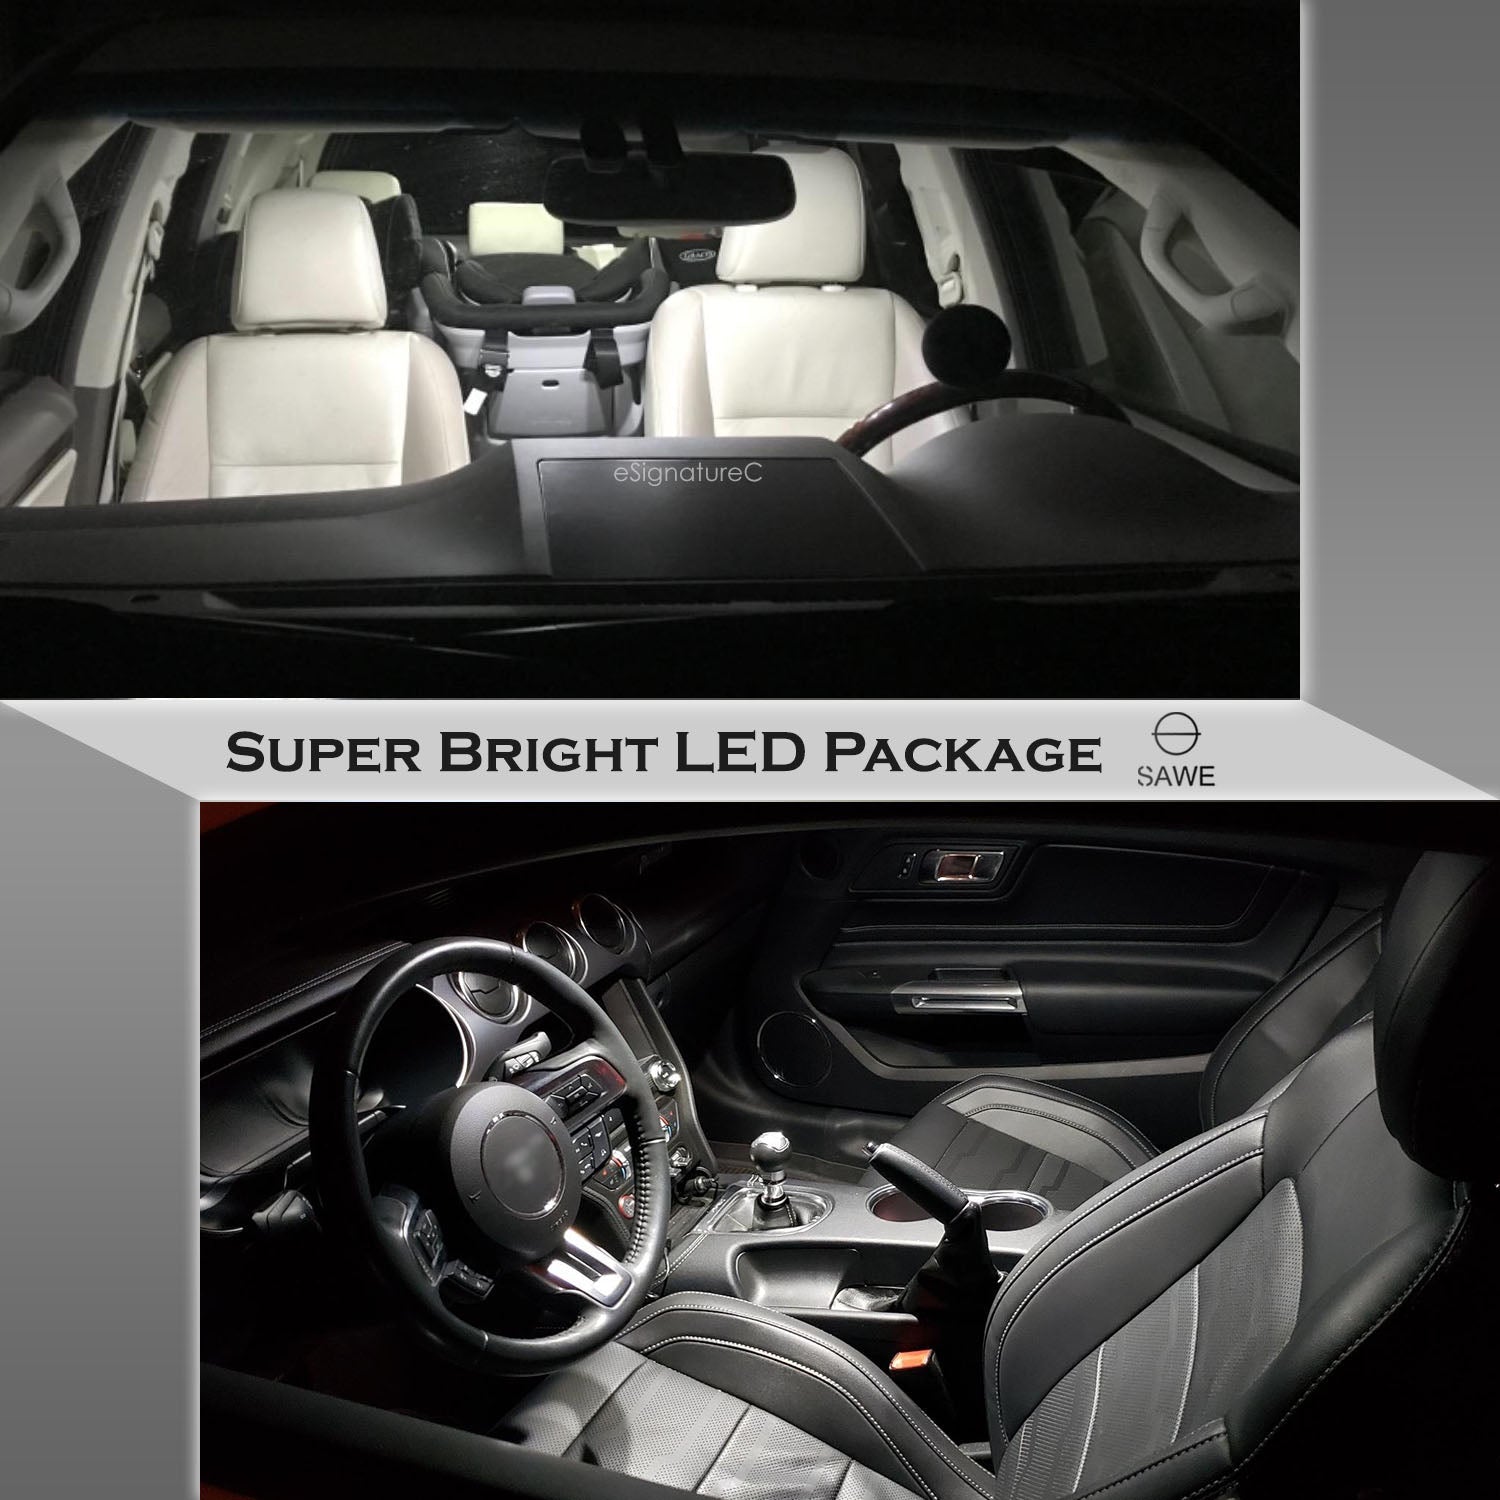 For Lexus IS250 IS350 ISF Interior LED Lights - Dome & Map Light Bulbs Package Kit for 2006 - 2013 - White